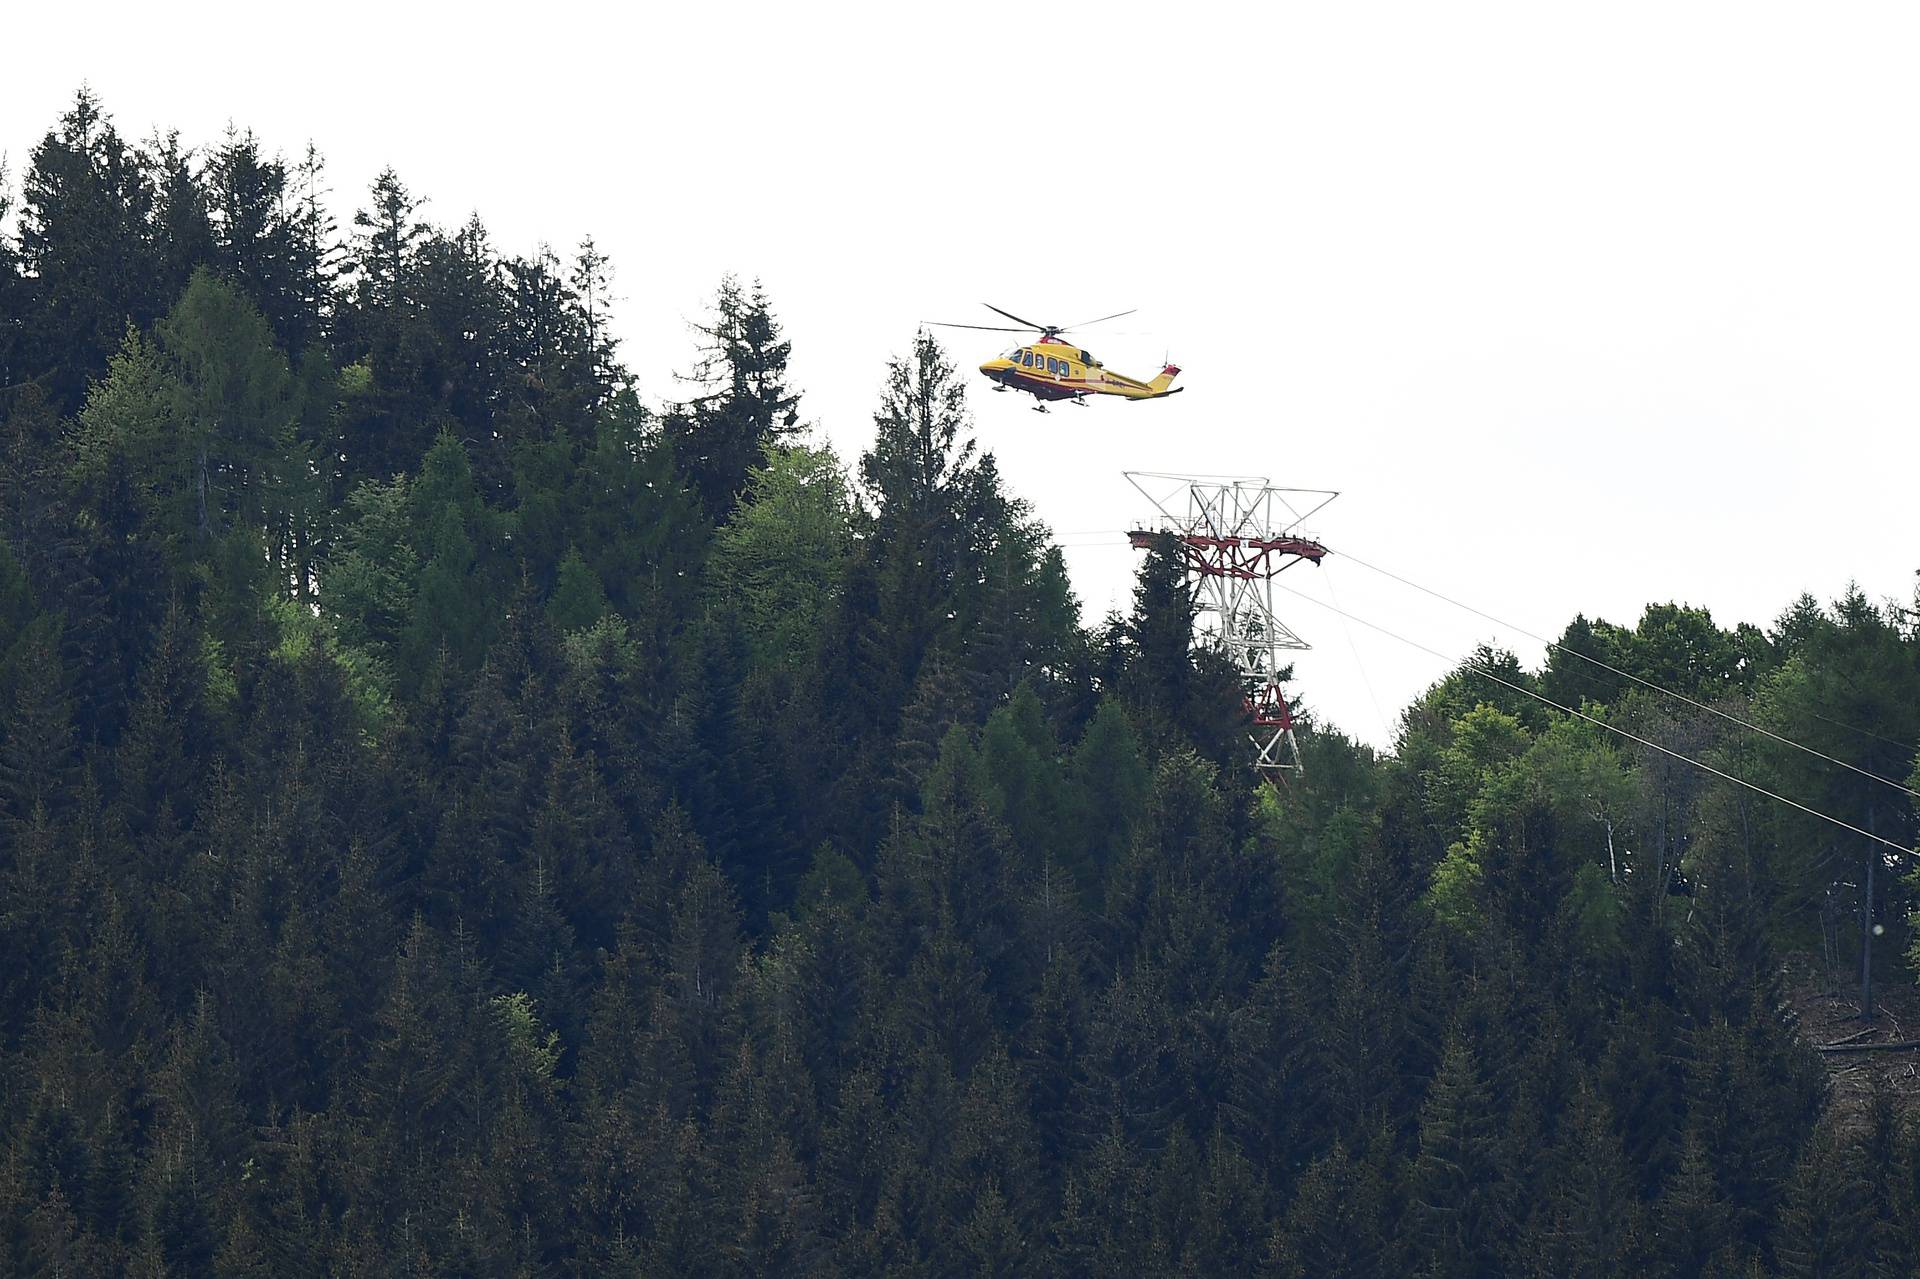 A helicopter flies over the site where a cable car connecting Maggiore lake with a mountain close by collapsed, in Stresa